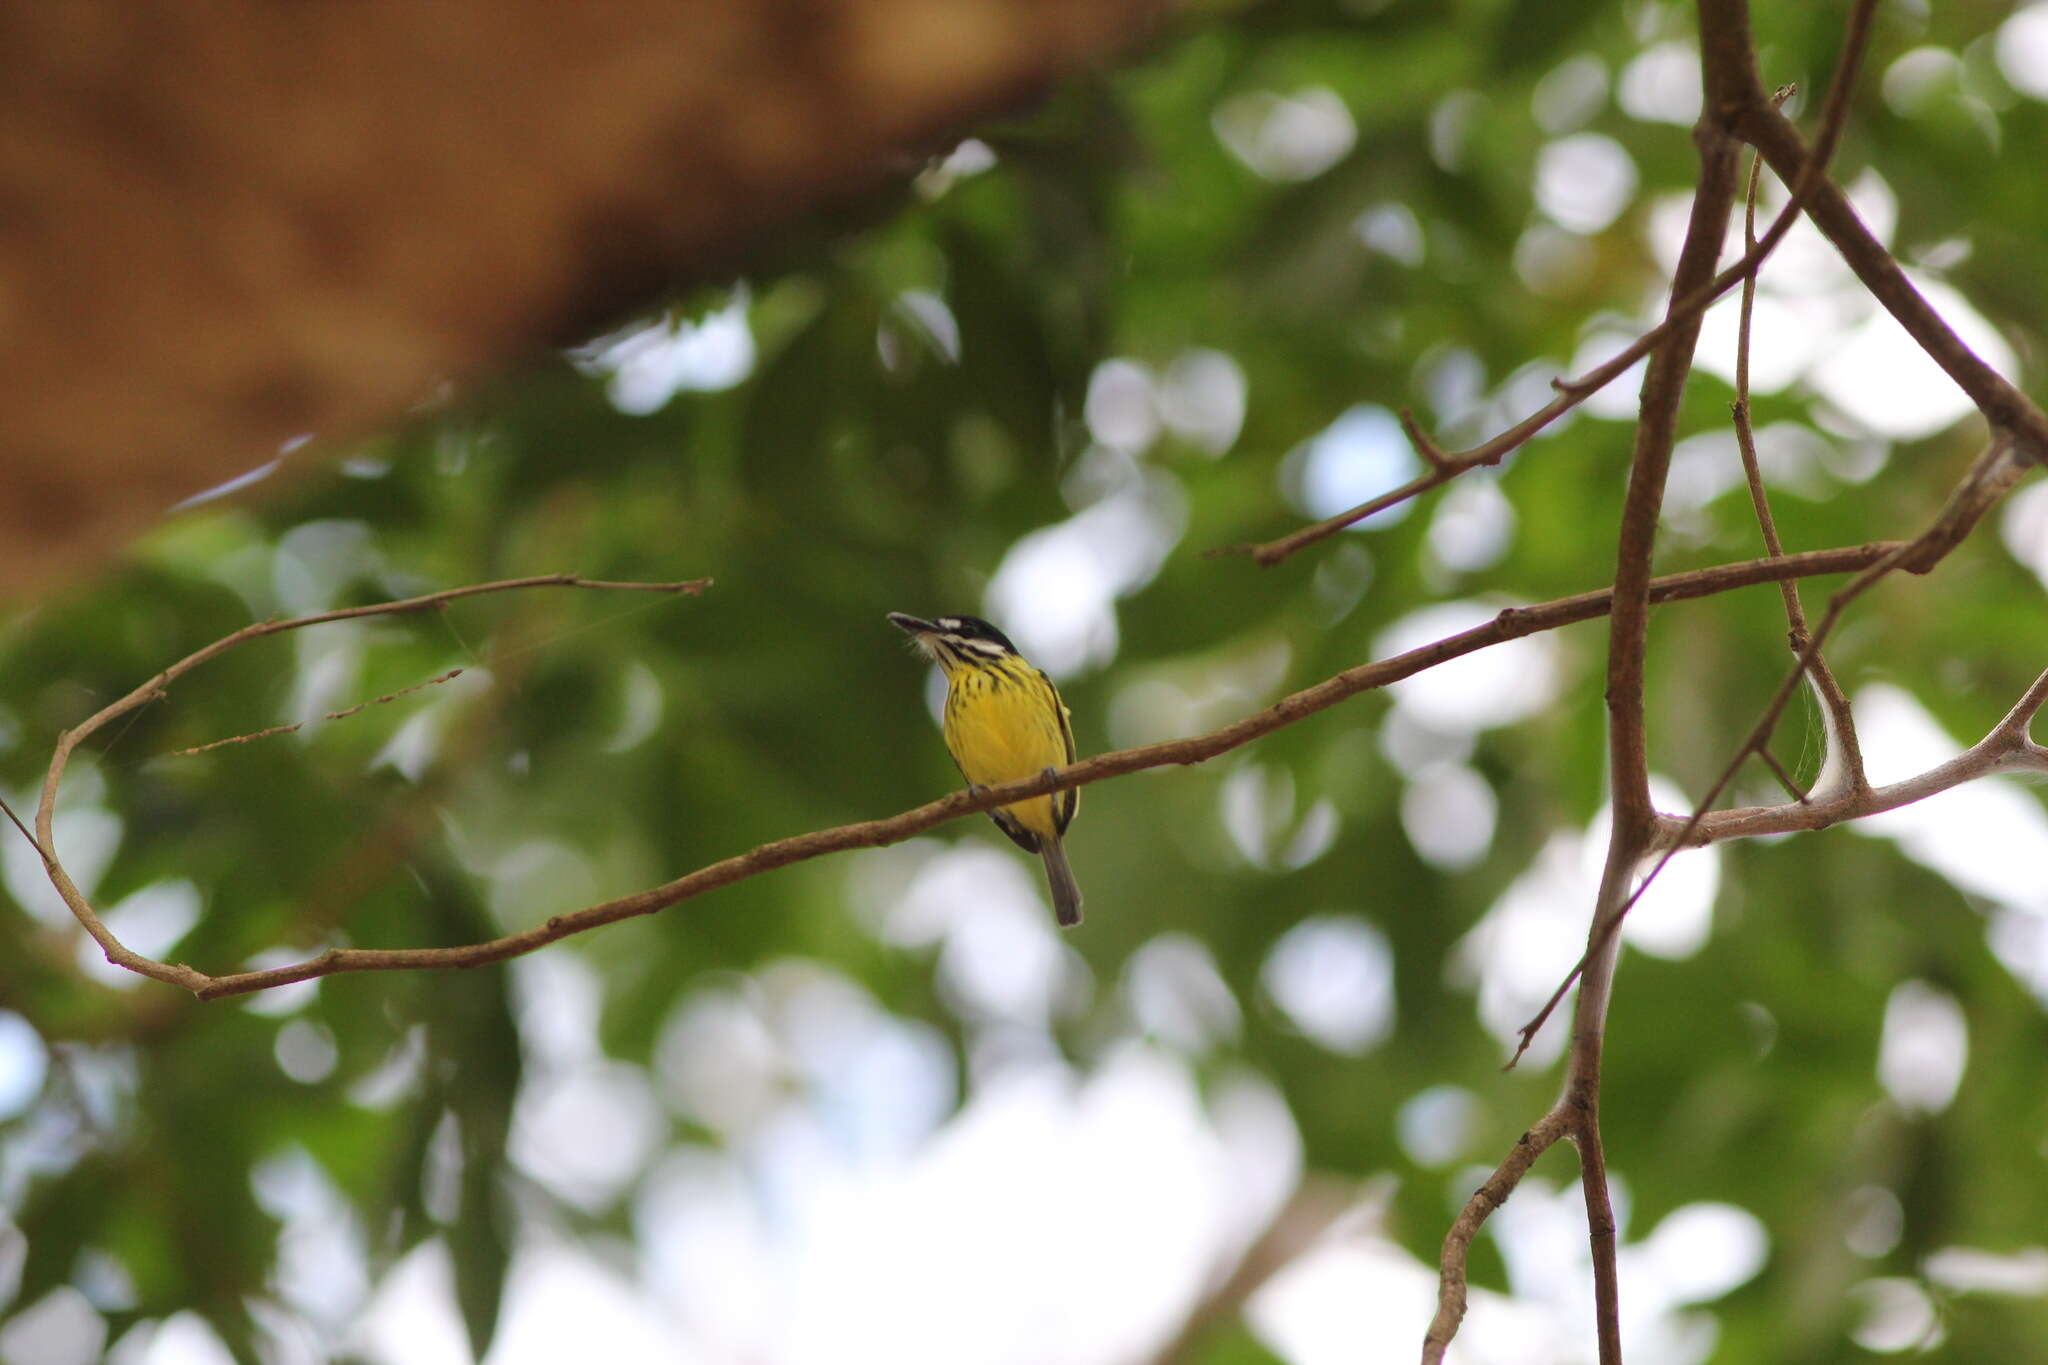 Image of Painted Tody-Flycatcher